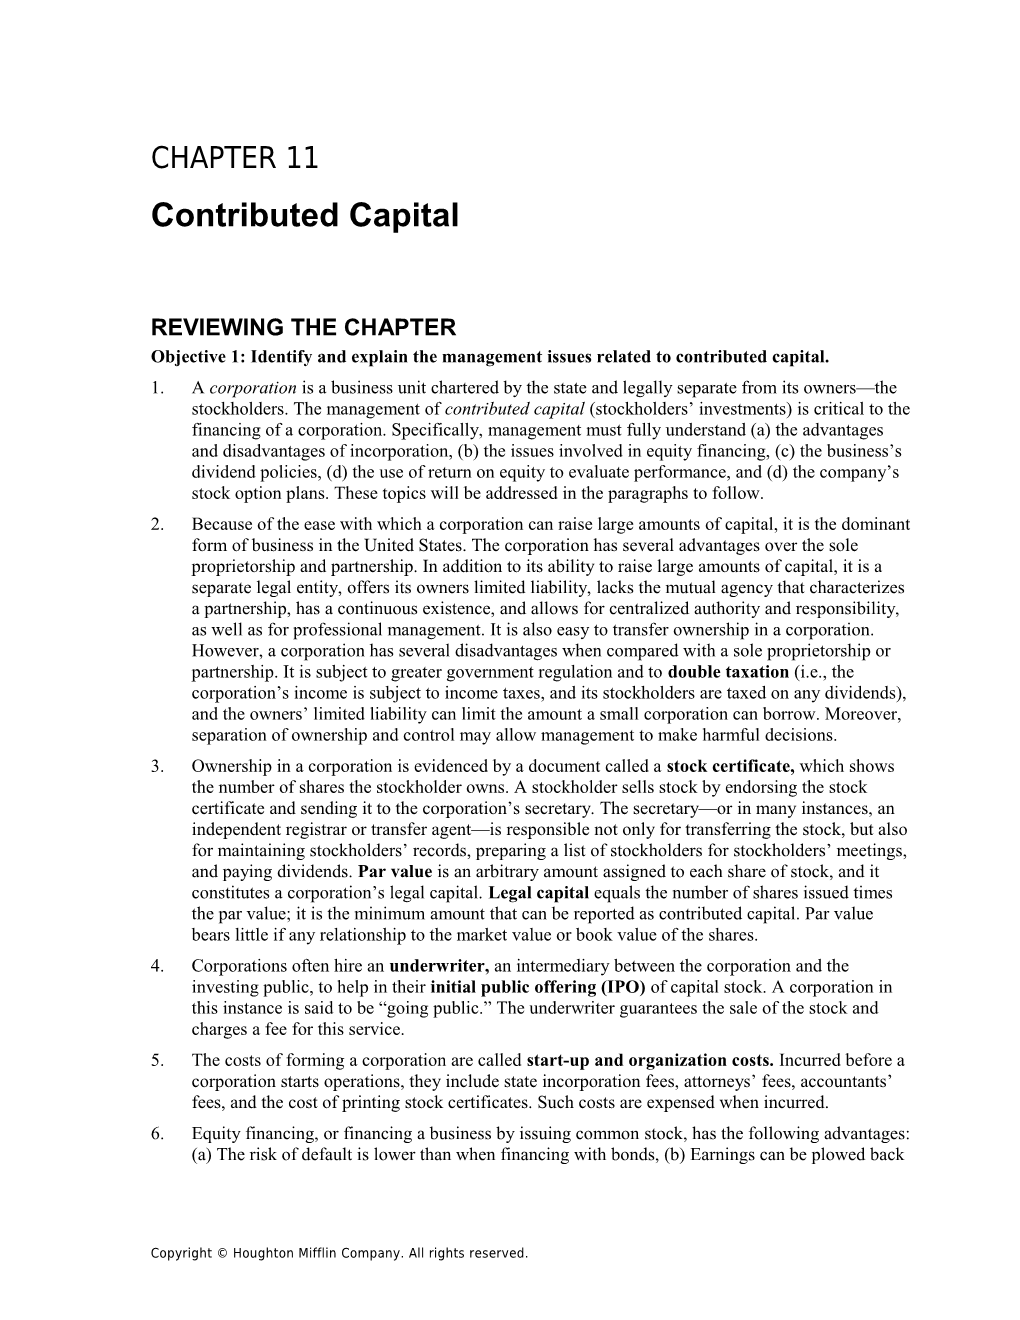 Chapter 11: Contributed Capital 1